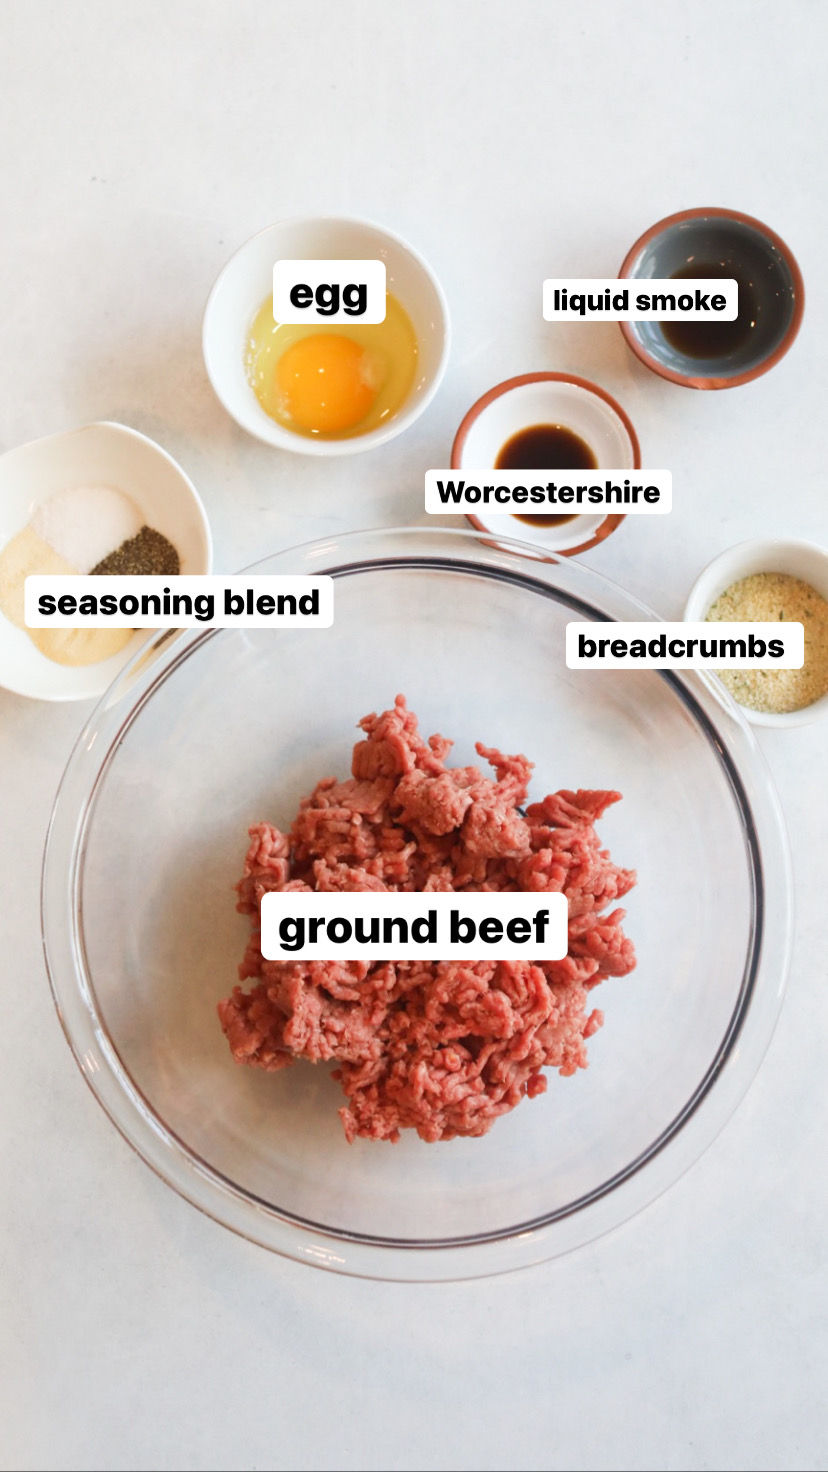 Loco Moco recipe ingredients in various sized clear and white bowls. Ground beef is in the center in a clear bowl, small white bowls filled with seasoning blend, egg, Worcestershire, liquid smoke and breadcrumbs.